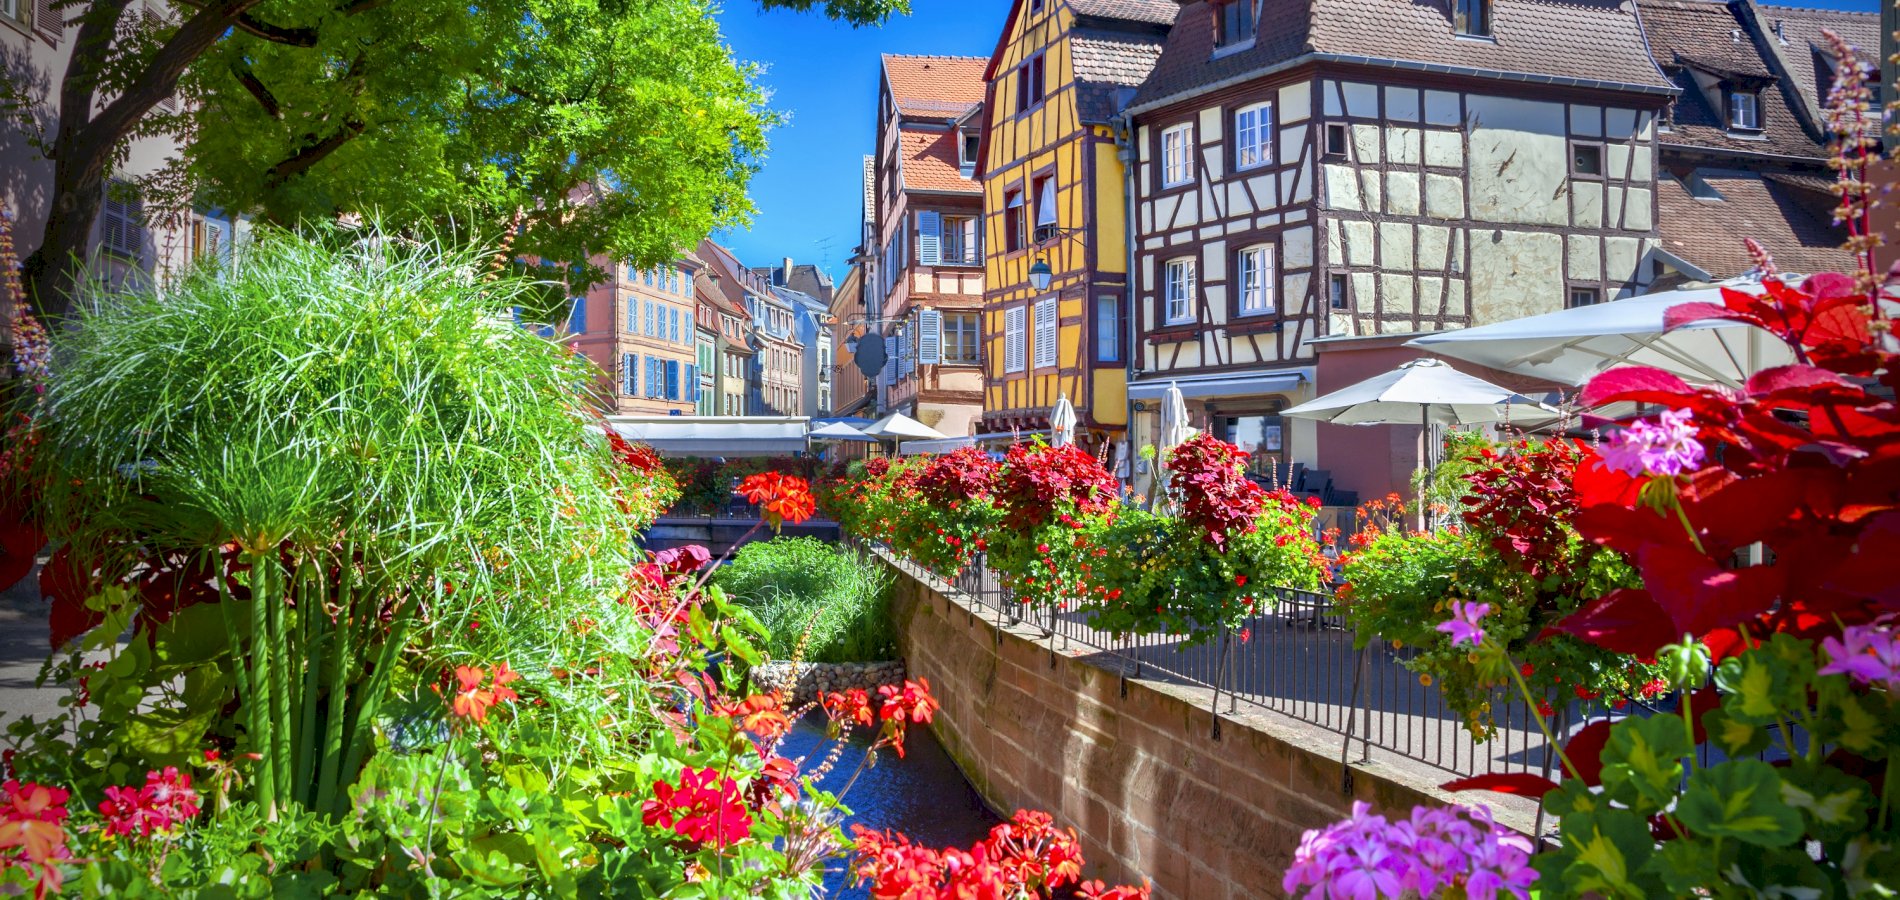 Ophorus Tours - 4 Days Small Group Alsace Packages - Strasbourg - 5* Hotel